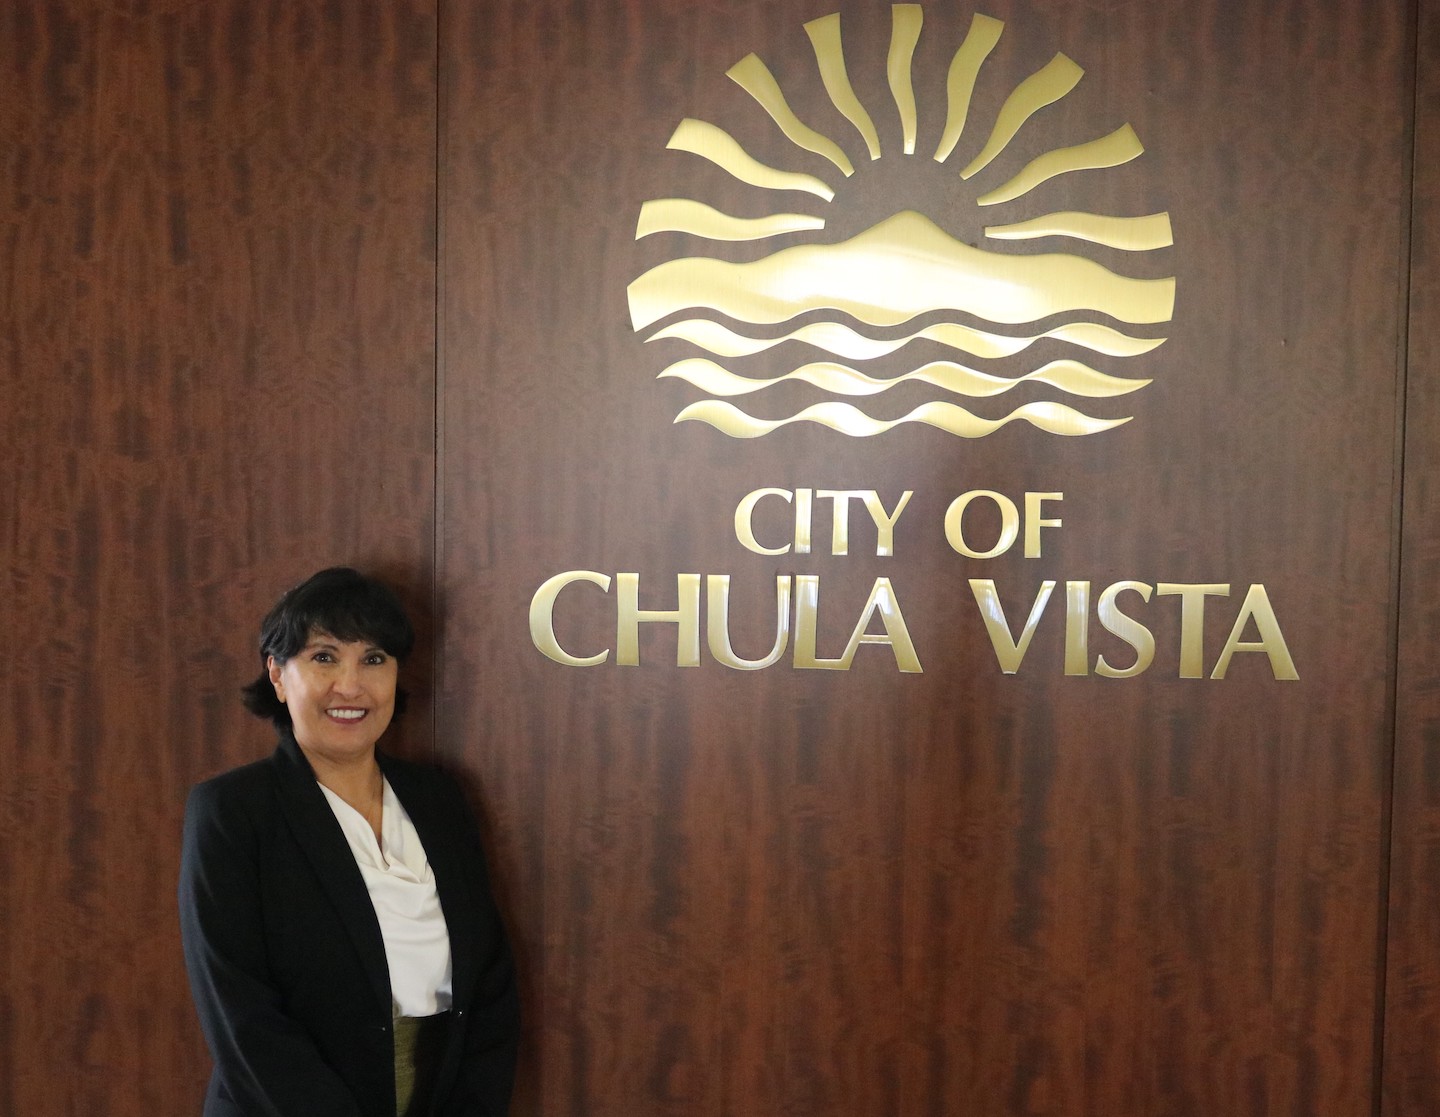 Kachadoorian is the first Latinx and first woman to be named as Chula Vista's city manager.